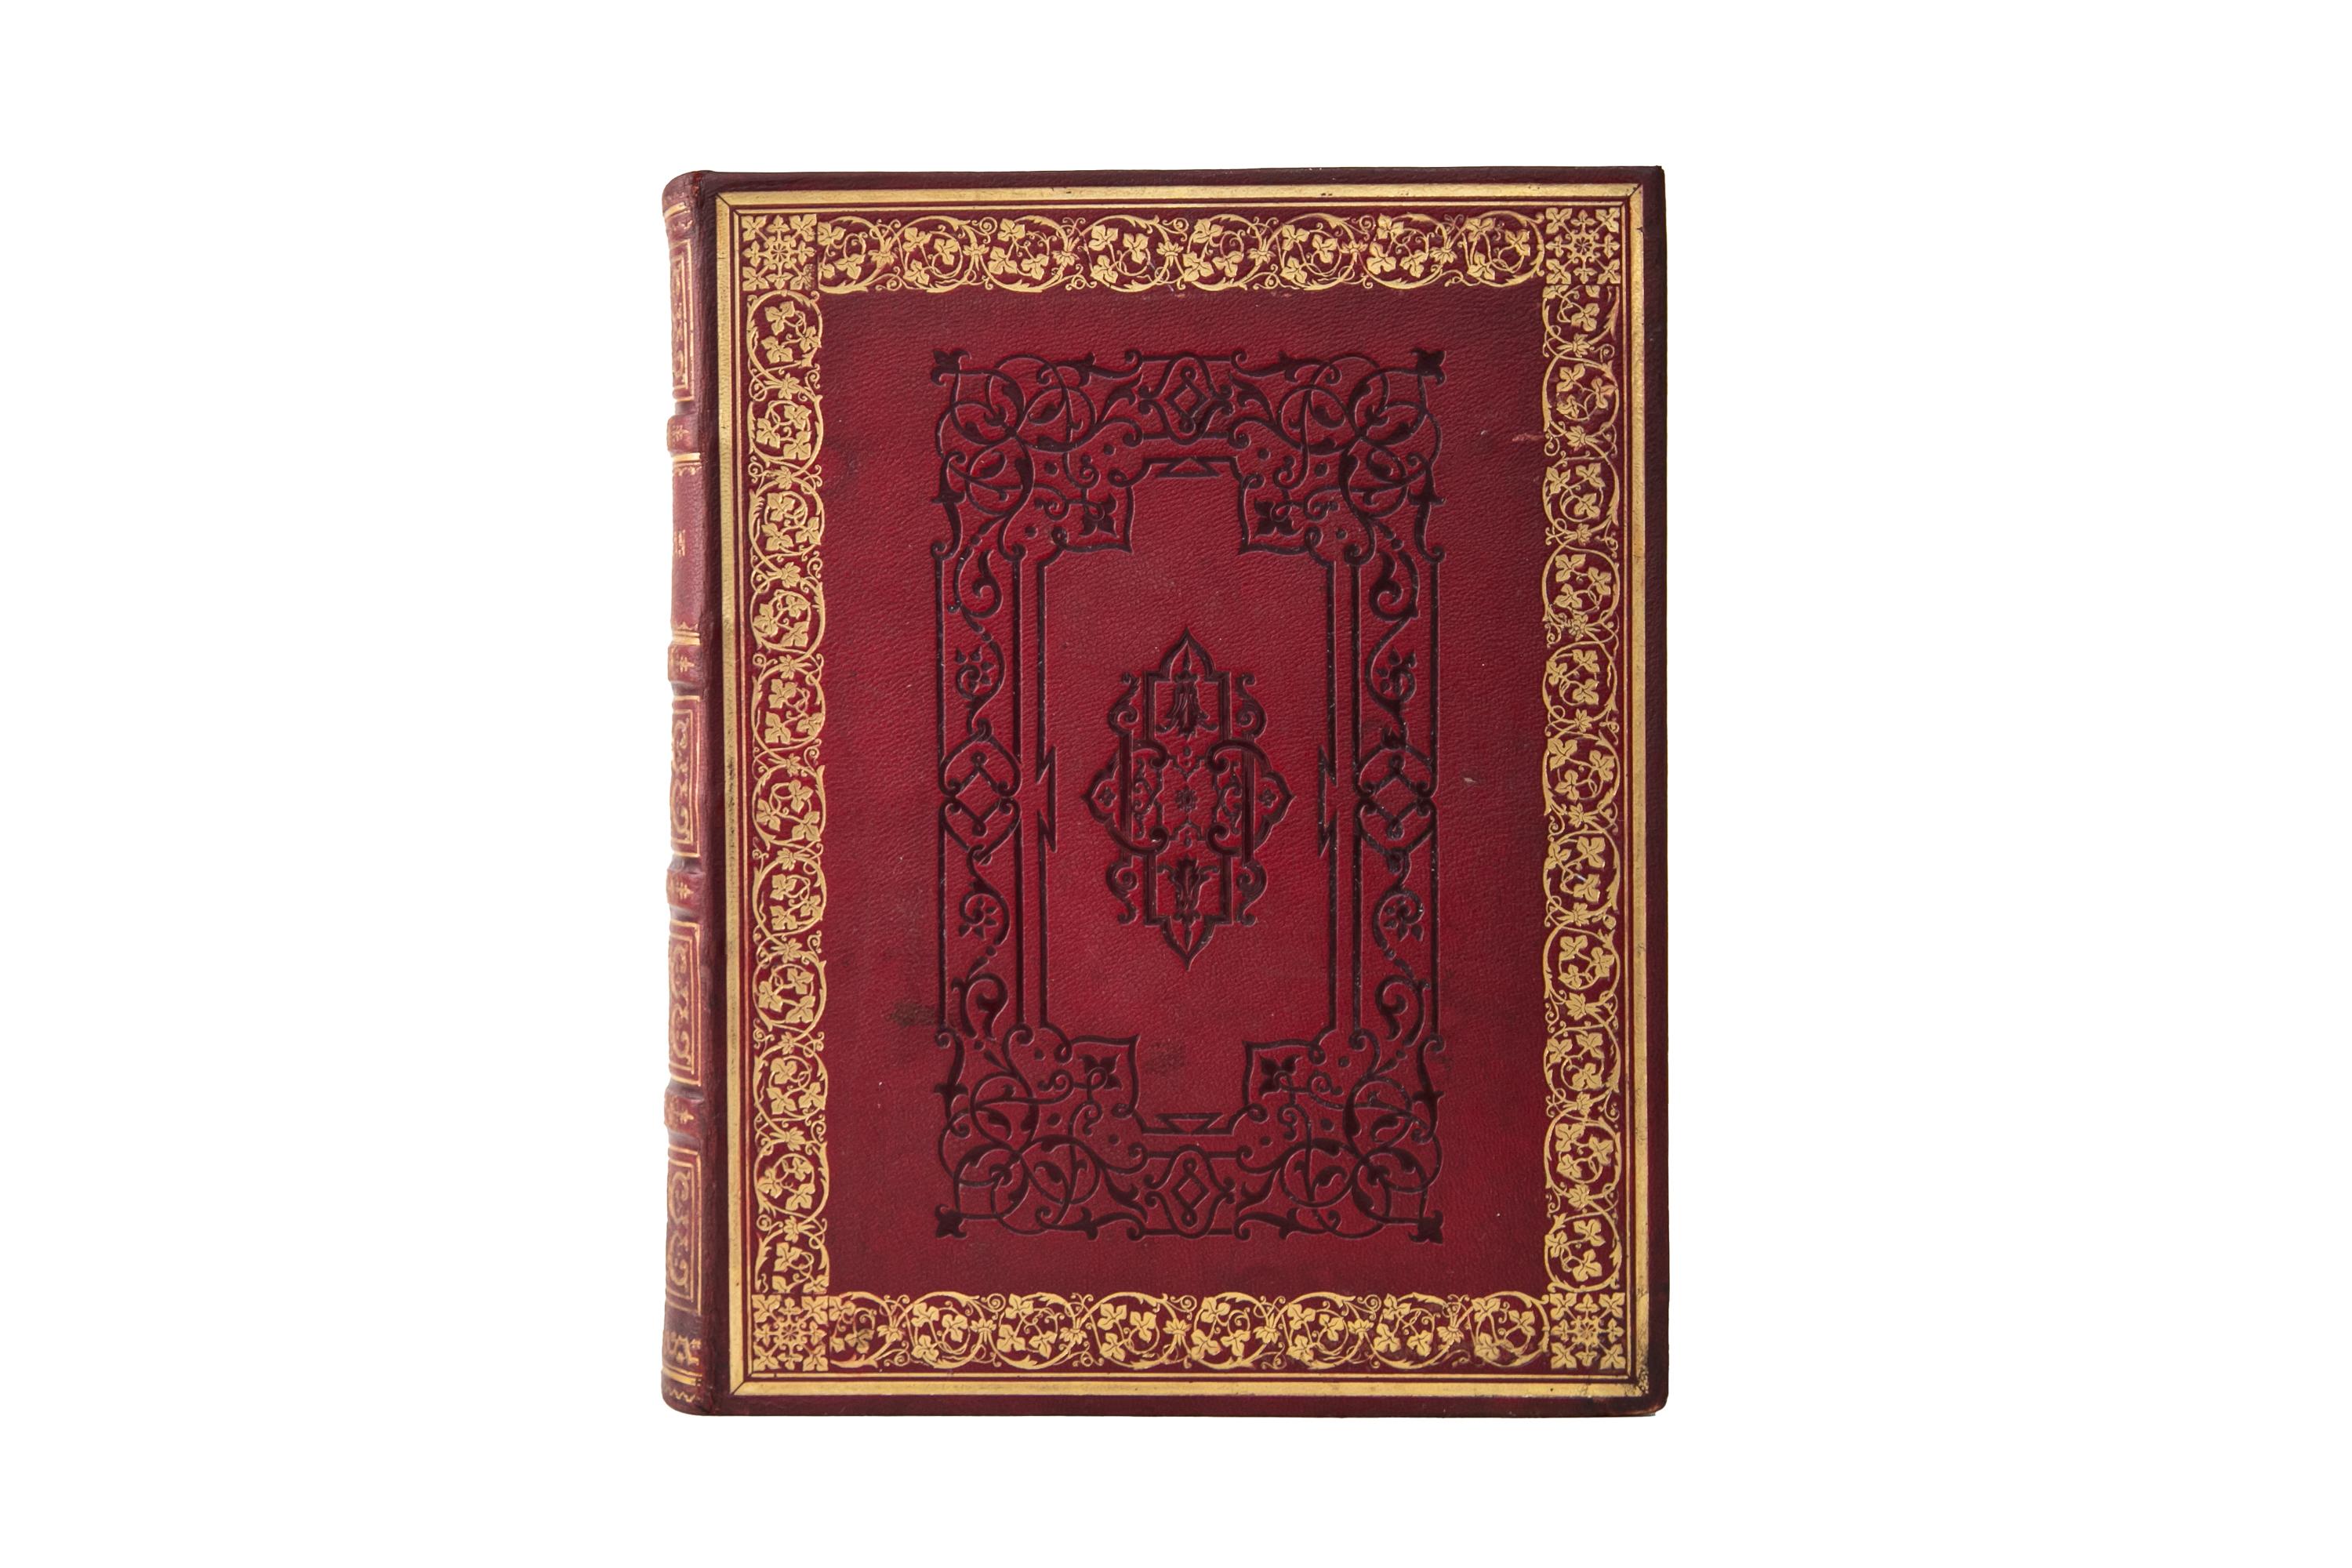 1 Volume. Emma Roberts, Hindostan. Bound in full red morocco with the covers displaying open-tooled central details, and gilt-tooled floral bordering details. The spines display raised bands, label lettering, bordering, and panel details, all